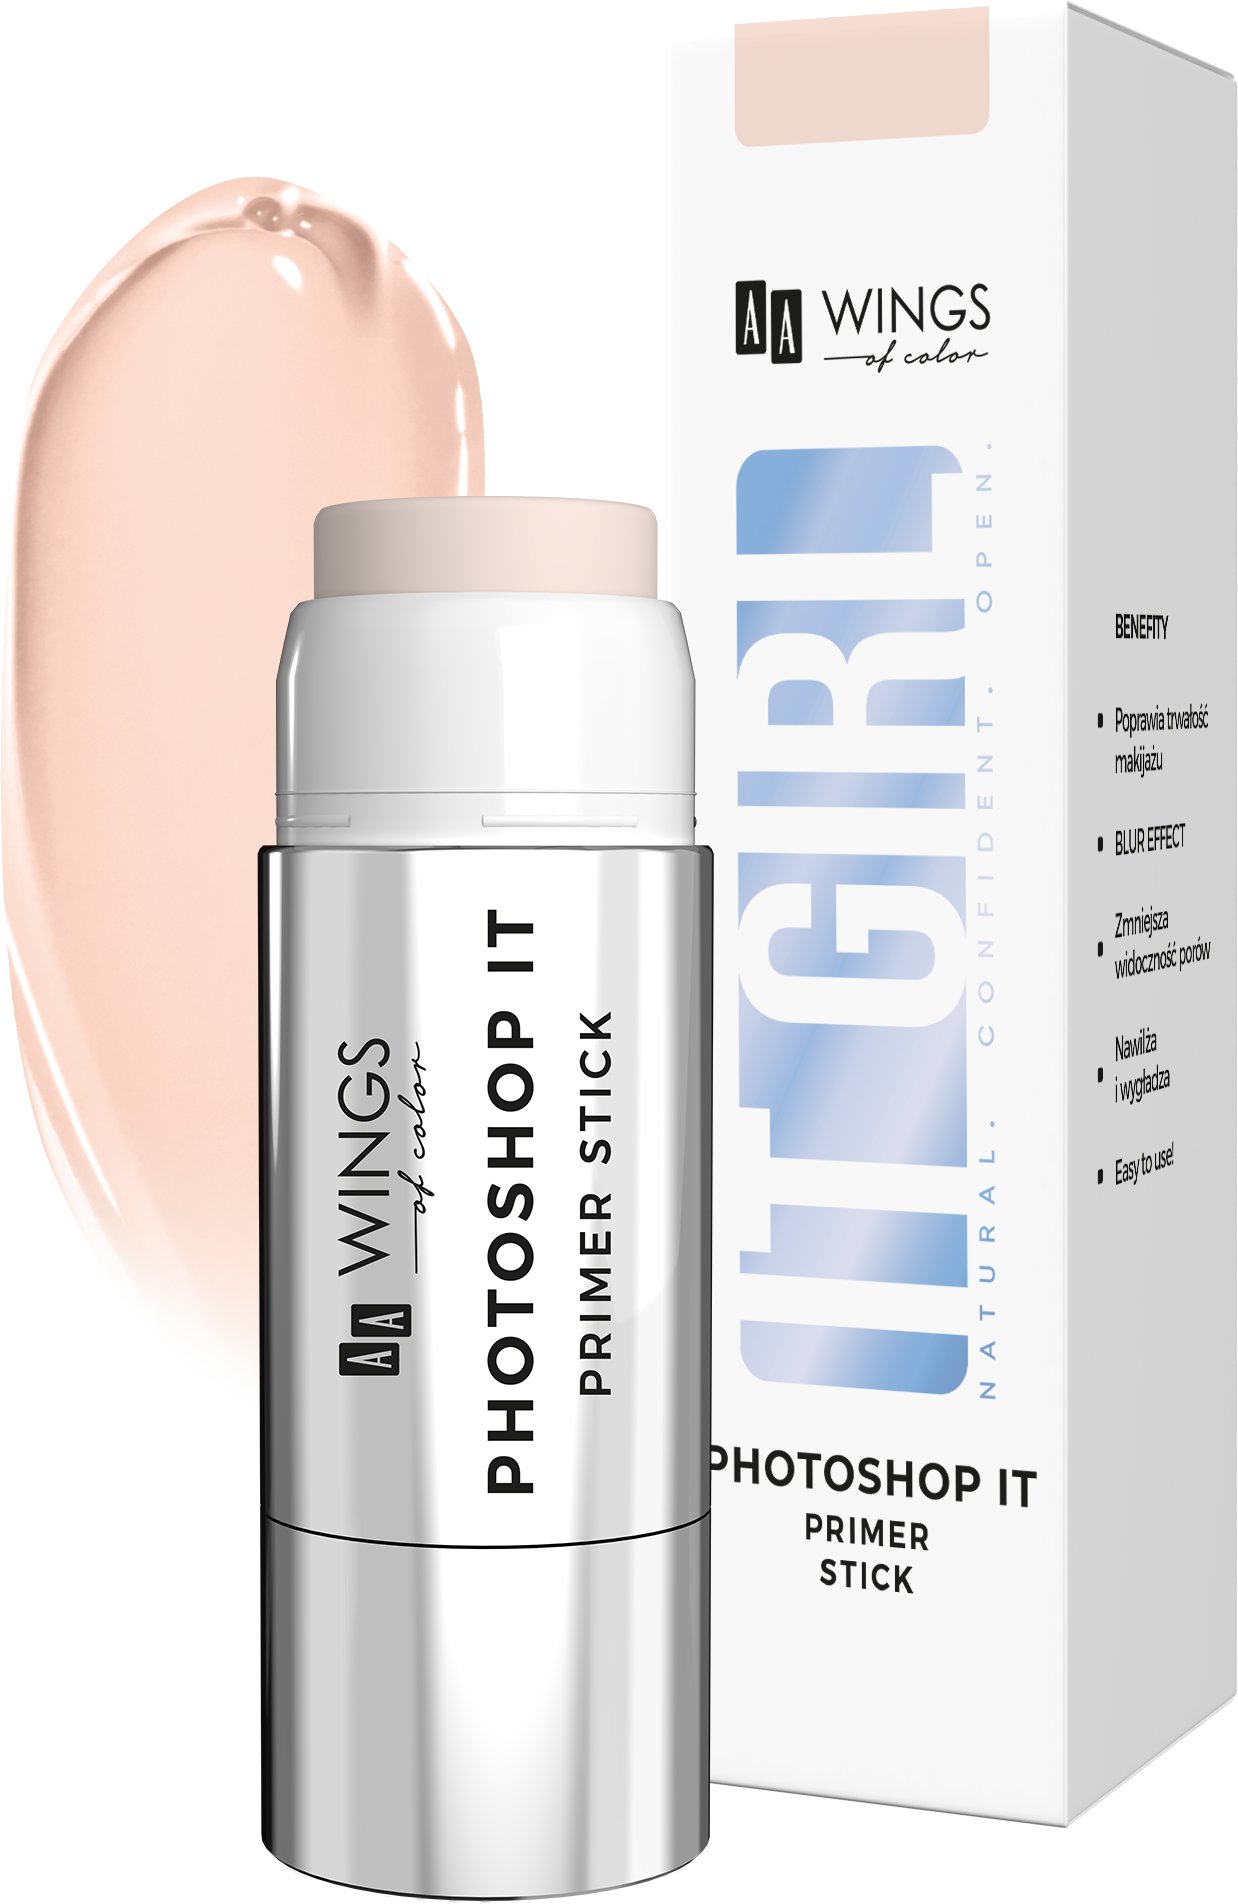 AA WINGS OF COLOR Photoshop It primer stick 5 g